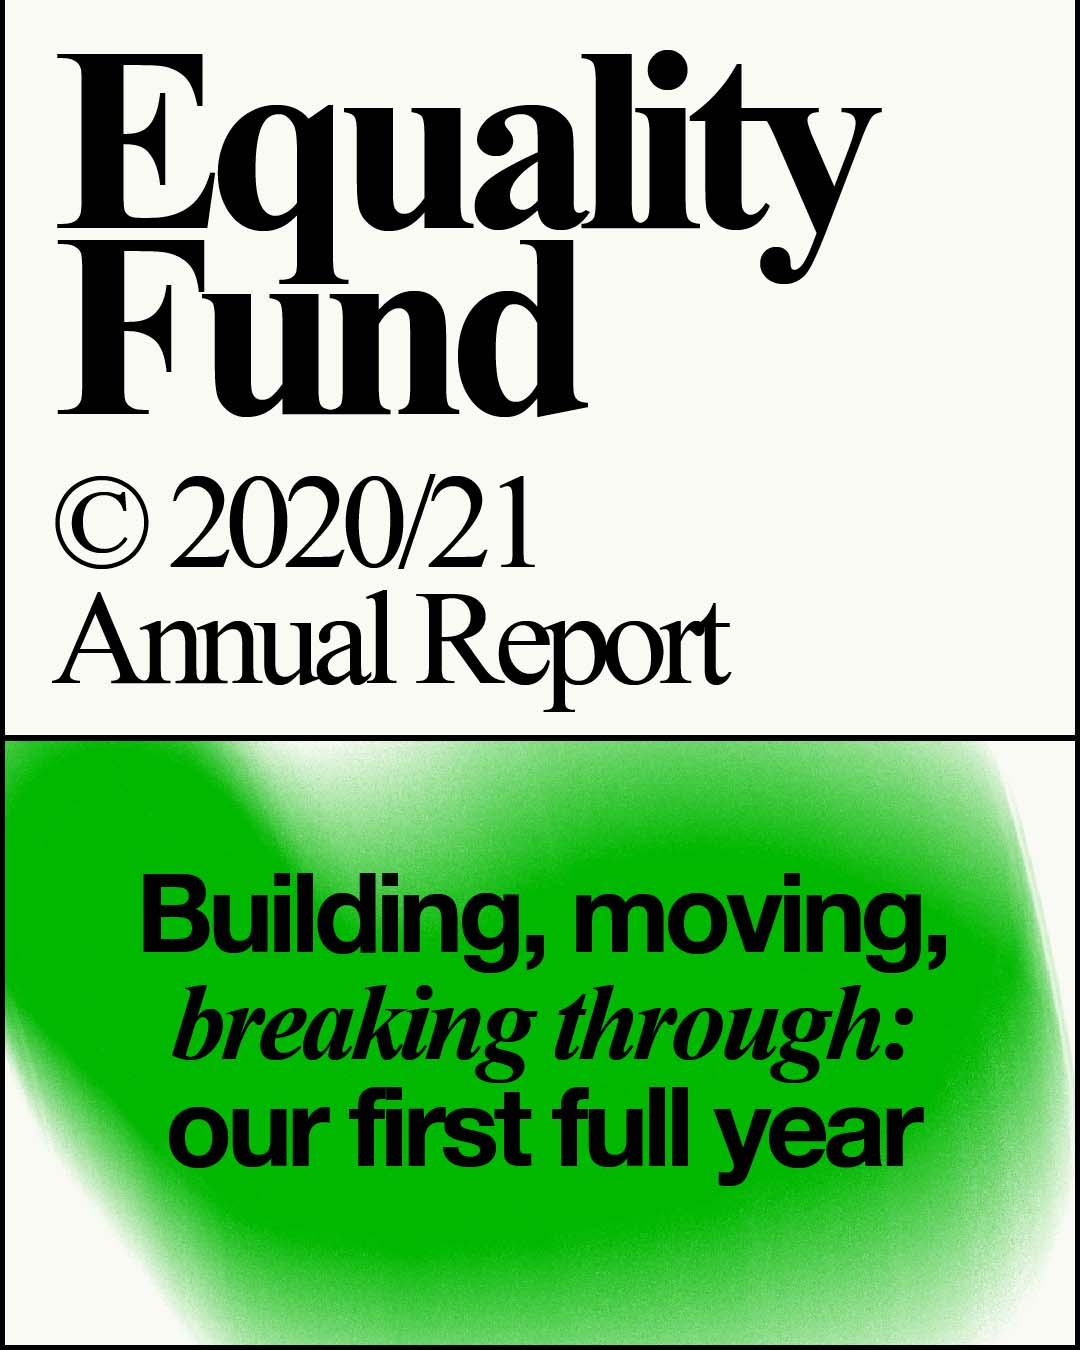 Equality Fund Annual Report